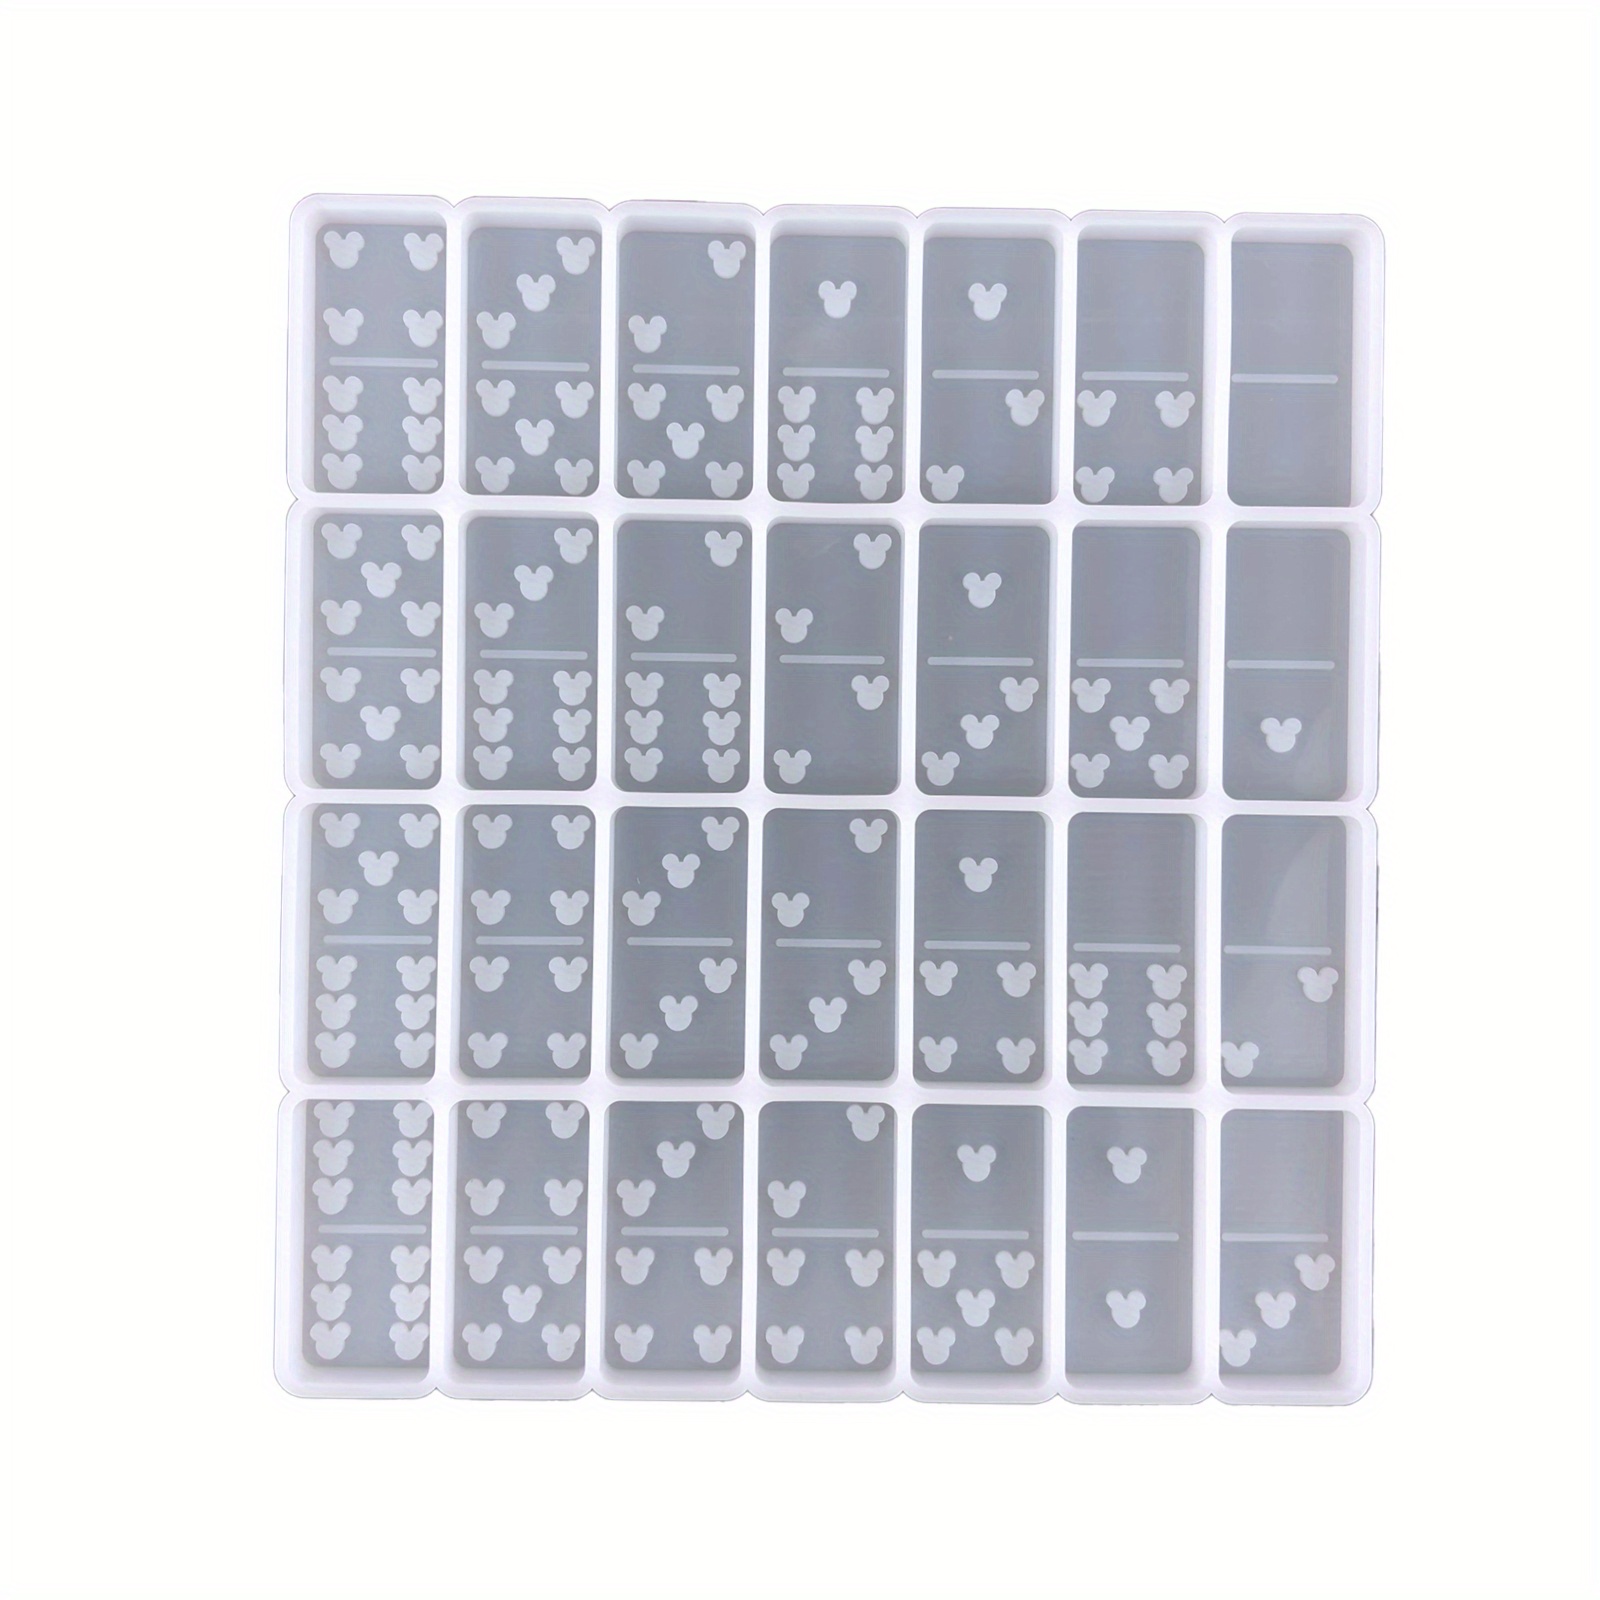 Domino Resin Molds, Domino Molds for Resin Casting, Professional